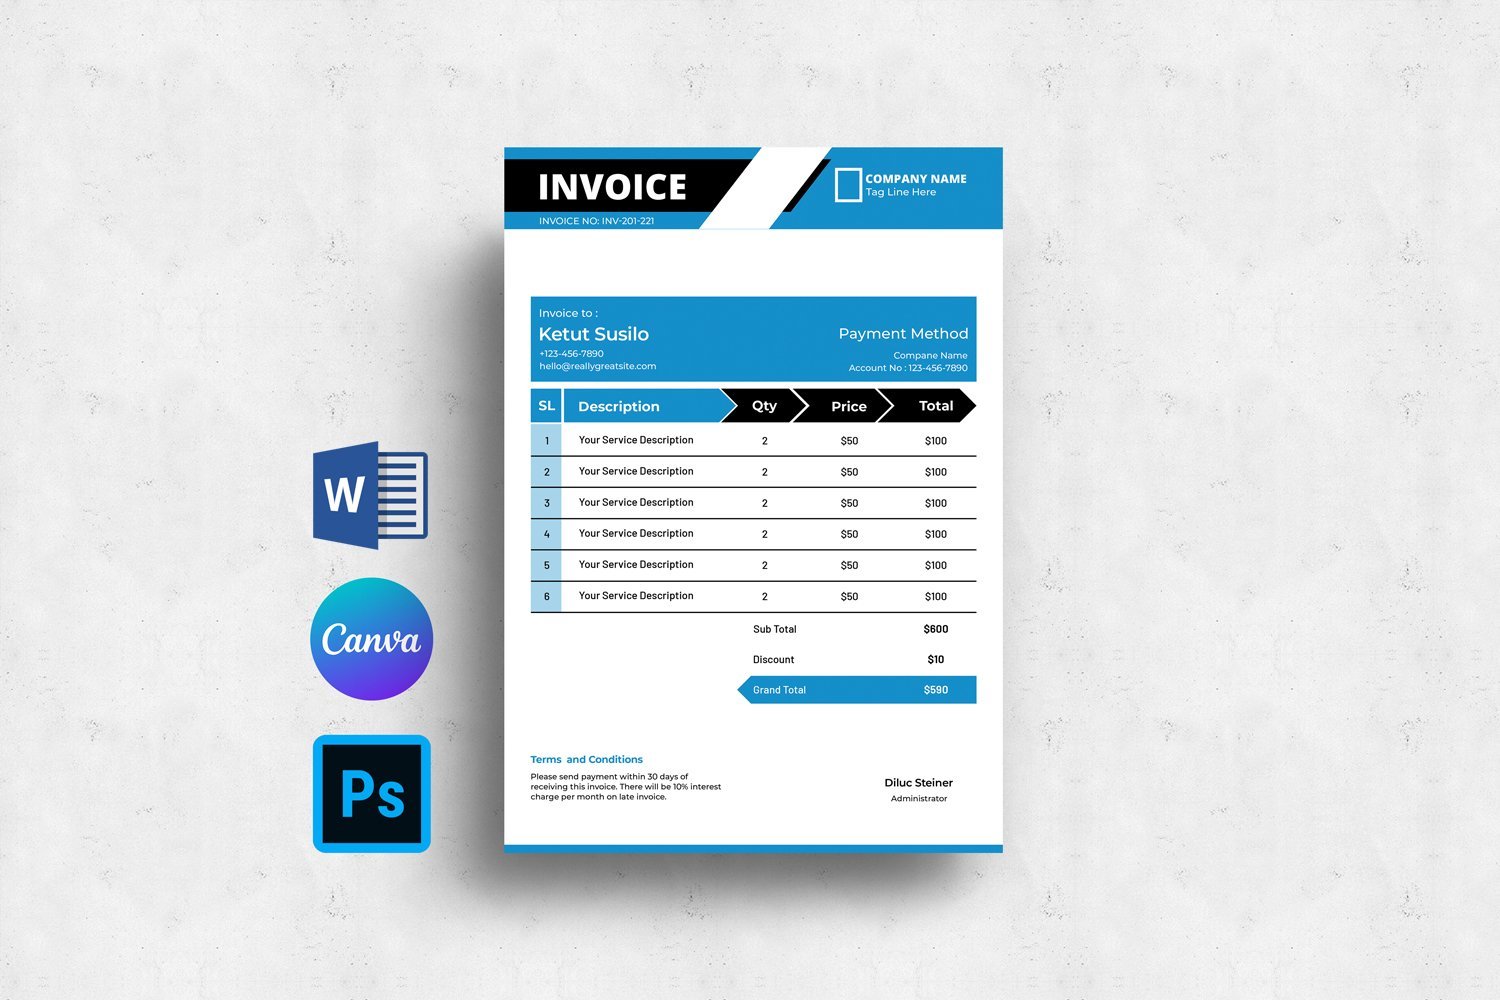 Template #363051 Invoice Template Webdesign Template - Logo template Preview